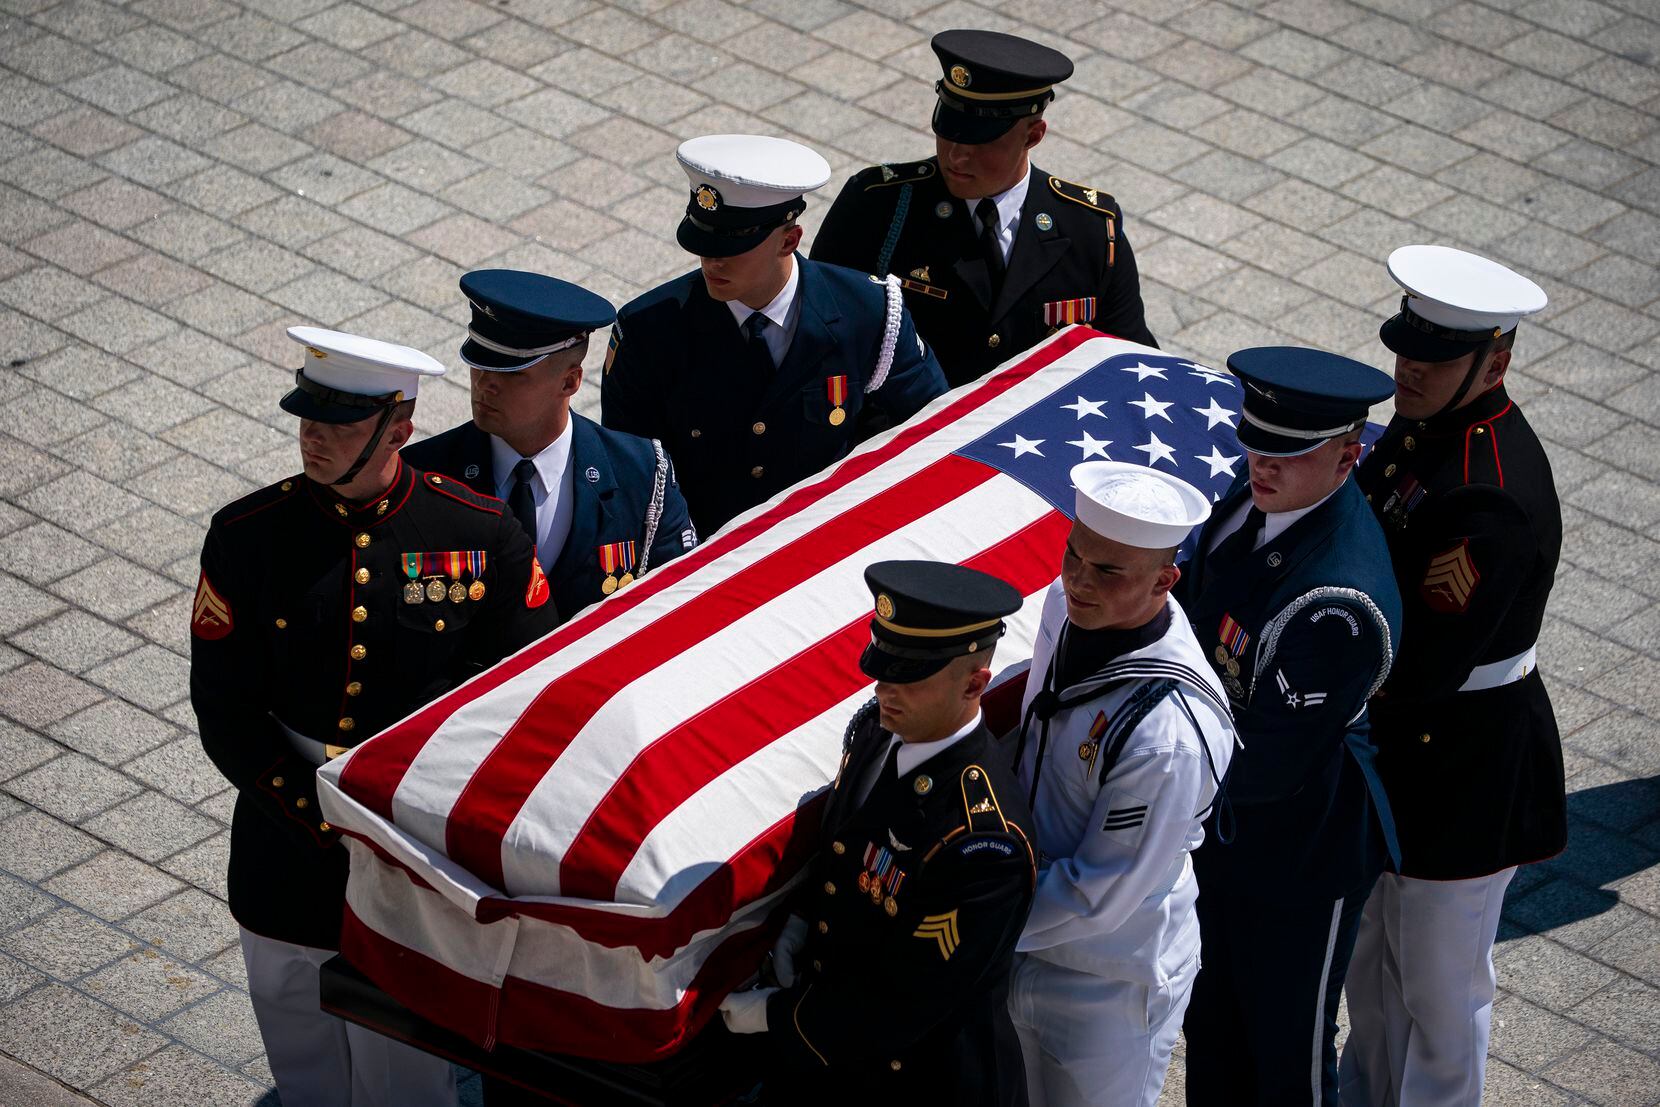 The flag-draped casket bearing the remains of Hershel W. “Woody” Williams is carried by...